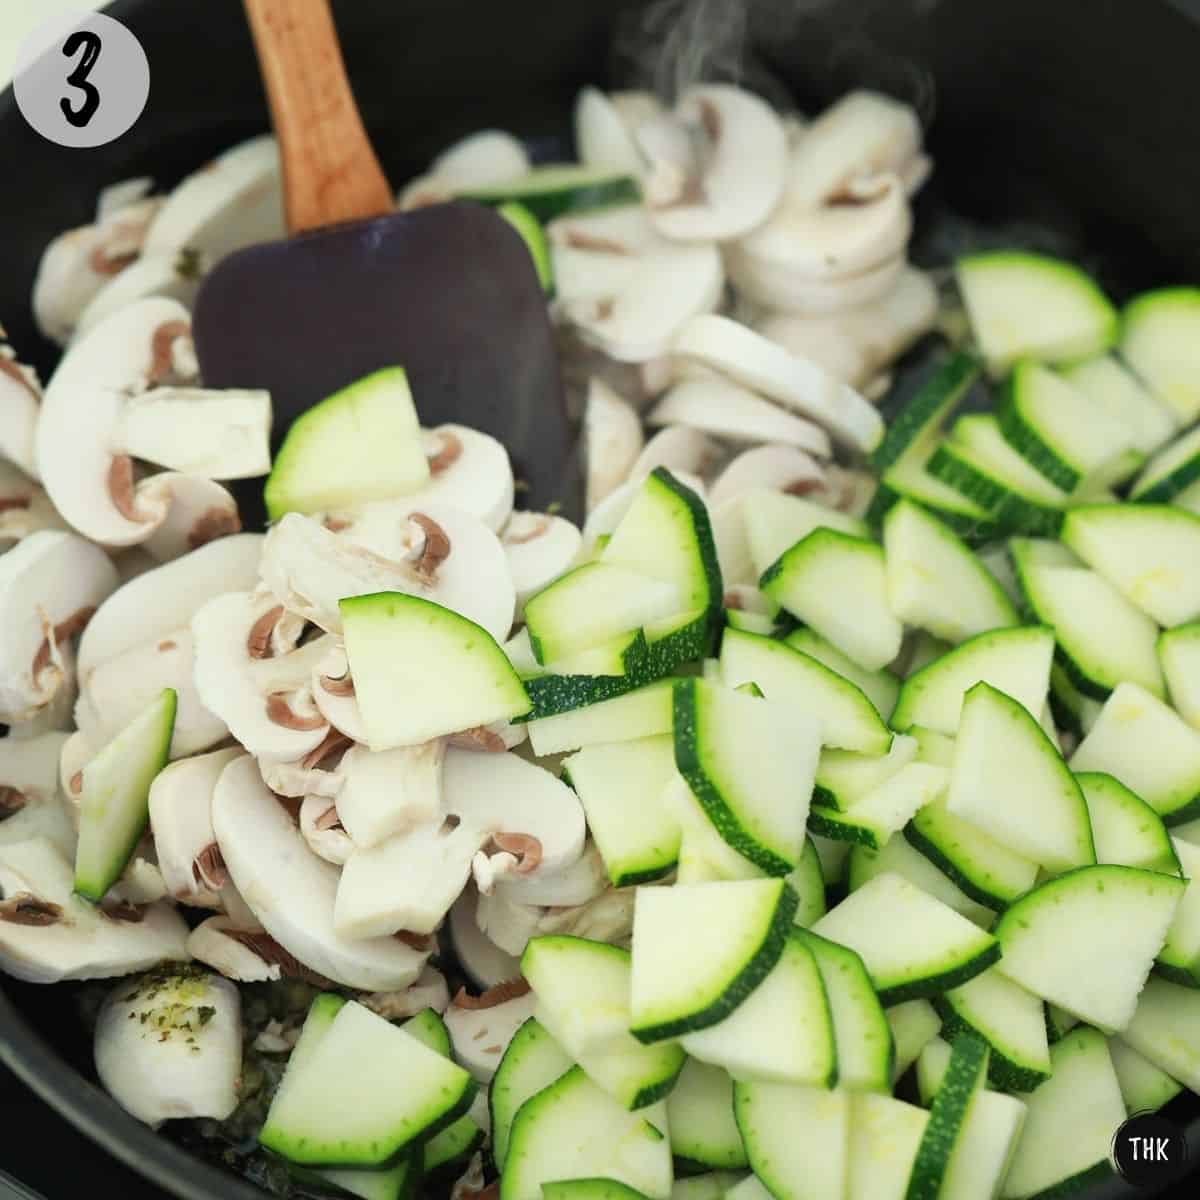 Mushrooms and zucchini slices being stirred in large pan.